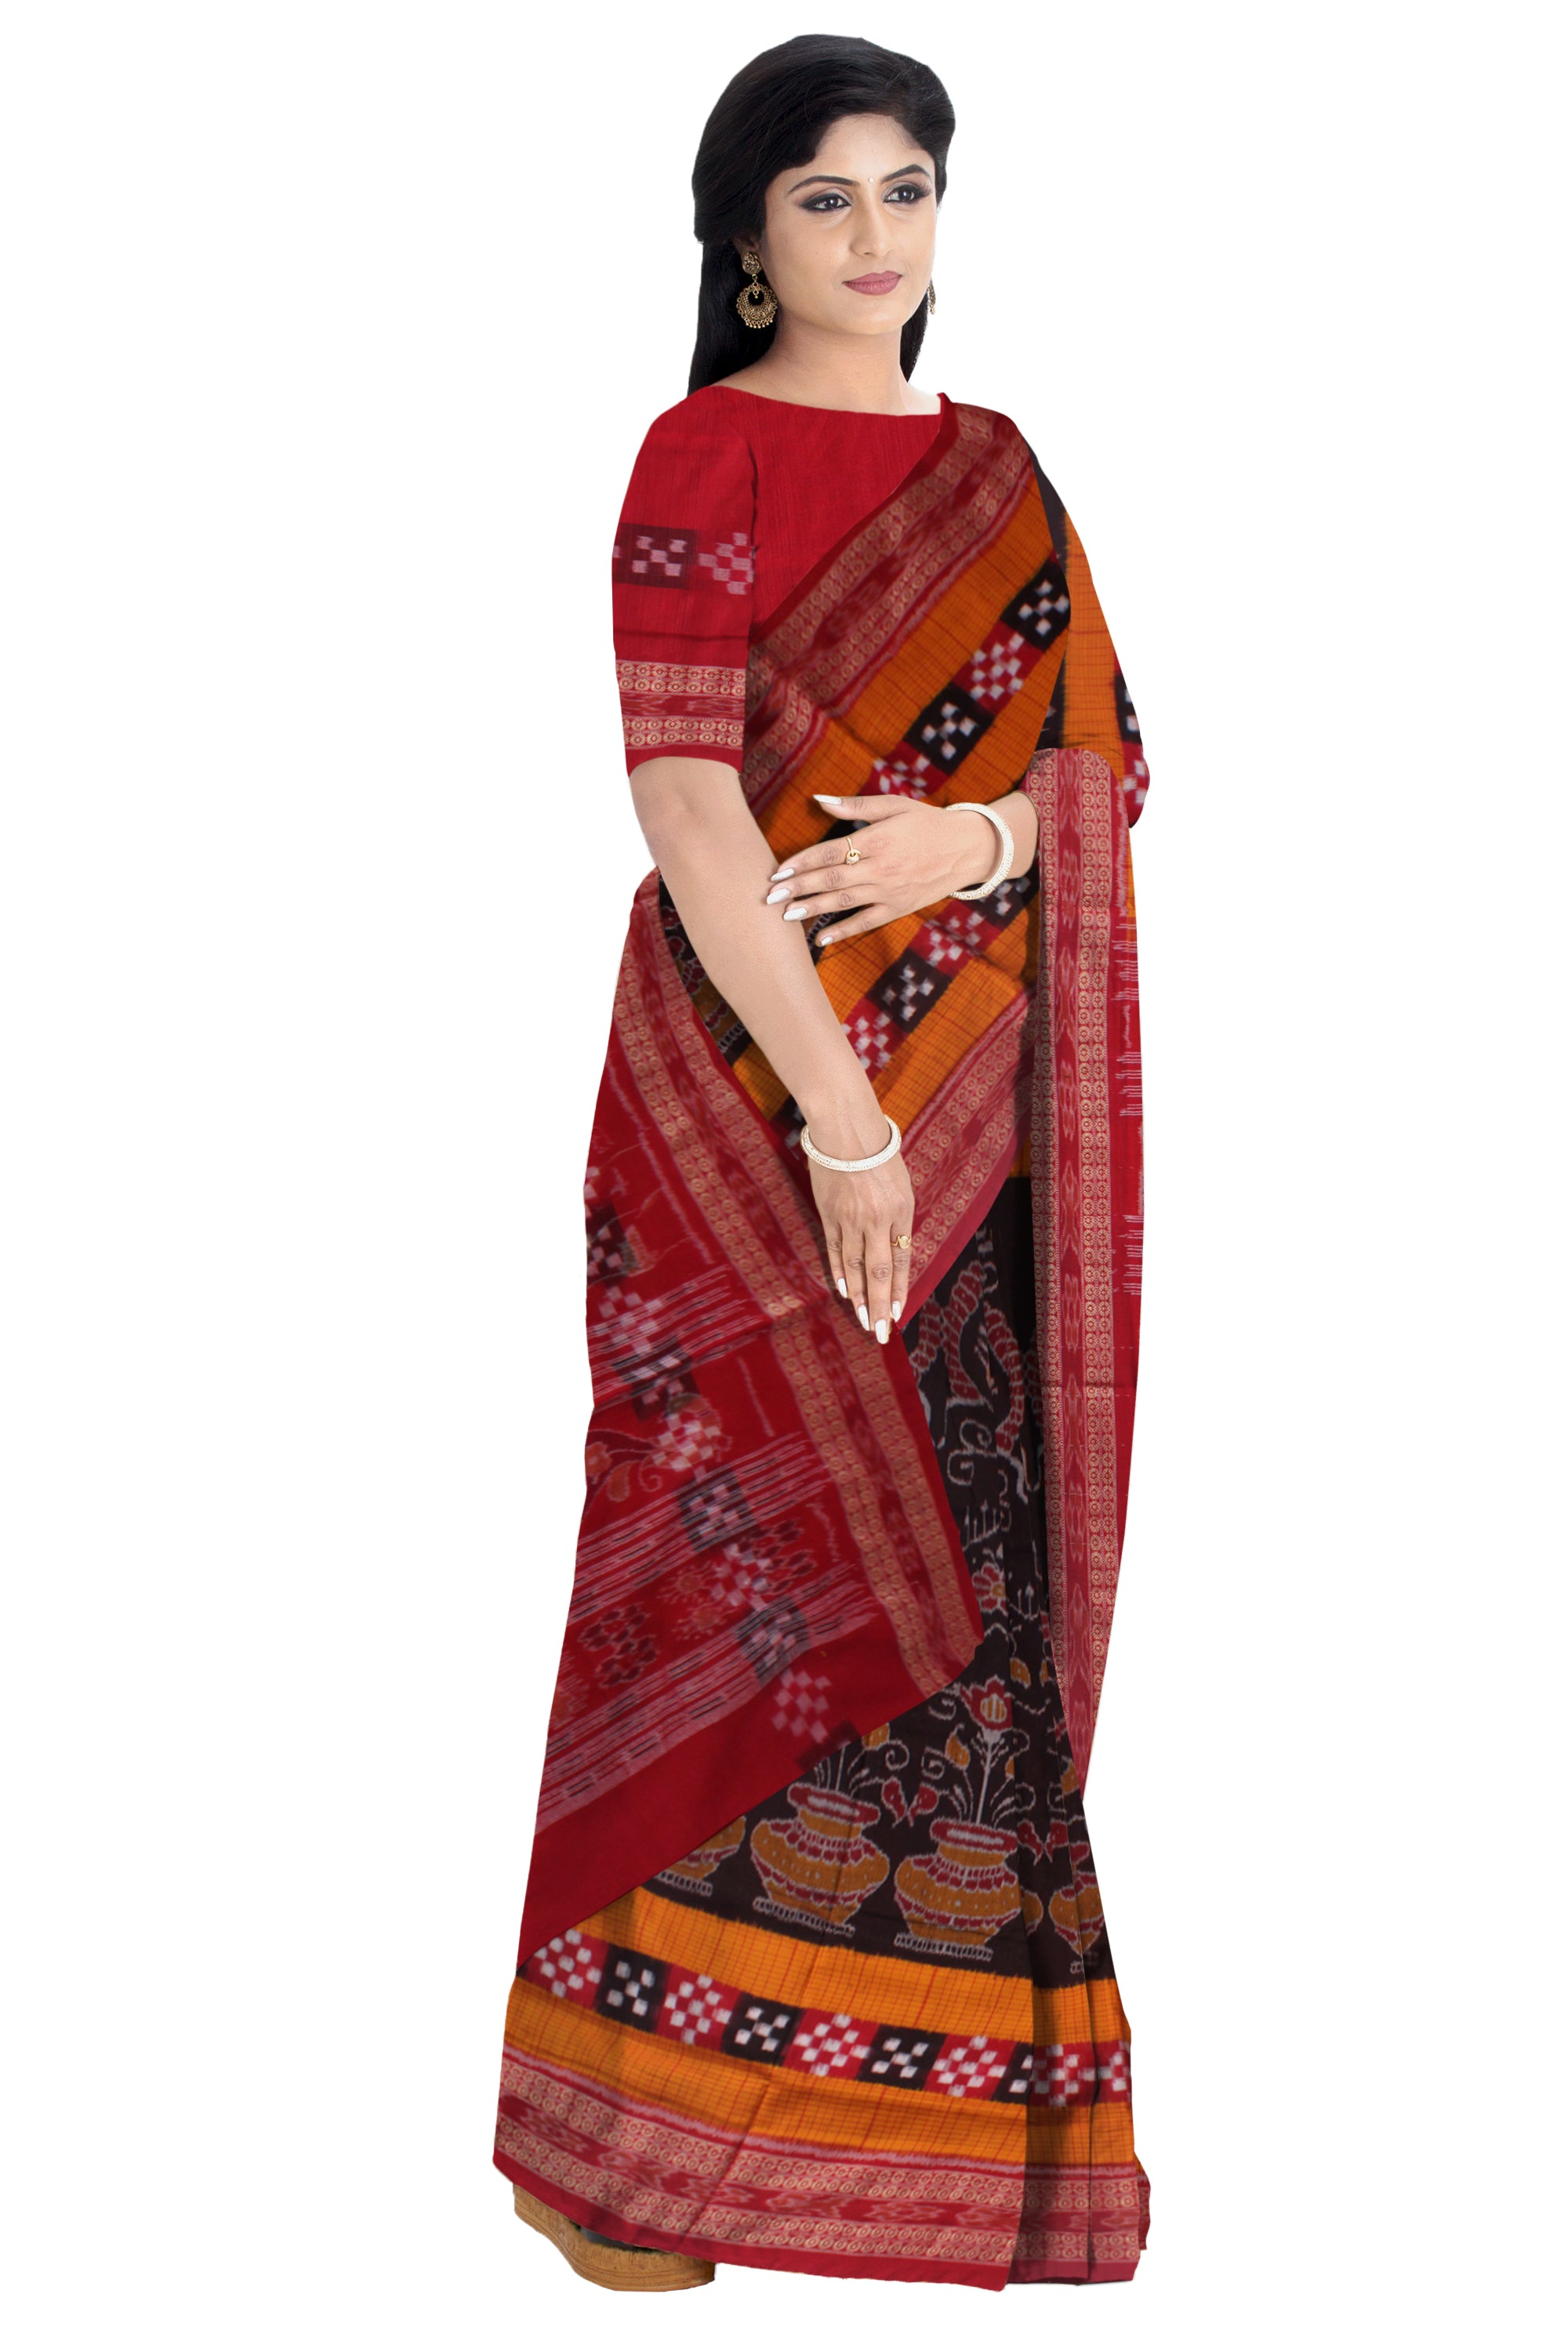 TRADITIONAL PASAPALI WITH KALASH PATTERN PURE COTTON SAREE IS COFFEE , YELLOW AND MAROON COLOR BASE.AVAILABLE WITH MATCHING BLOUSE PIECE. - Koshali Arts & Crafts Enterprise